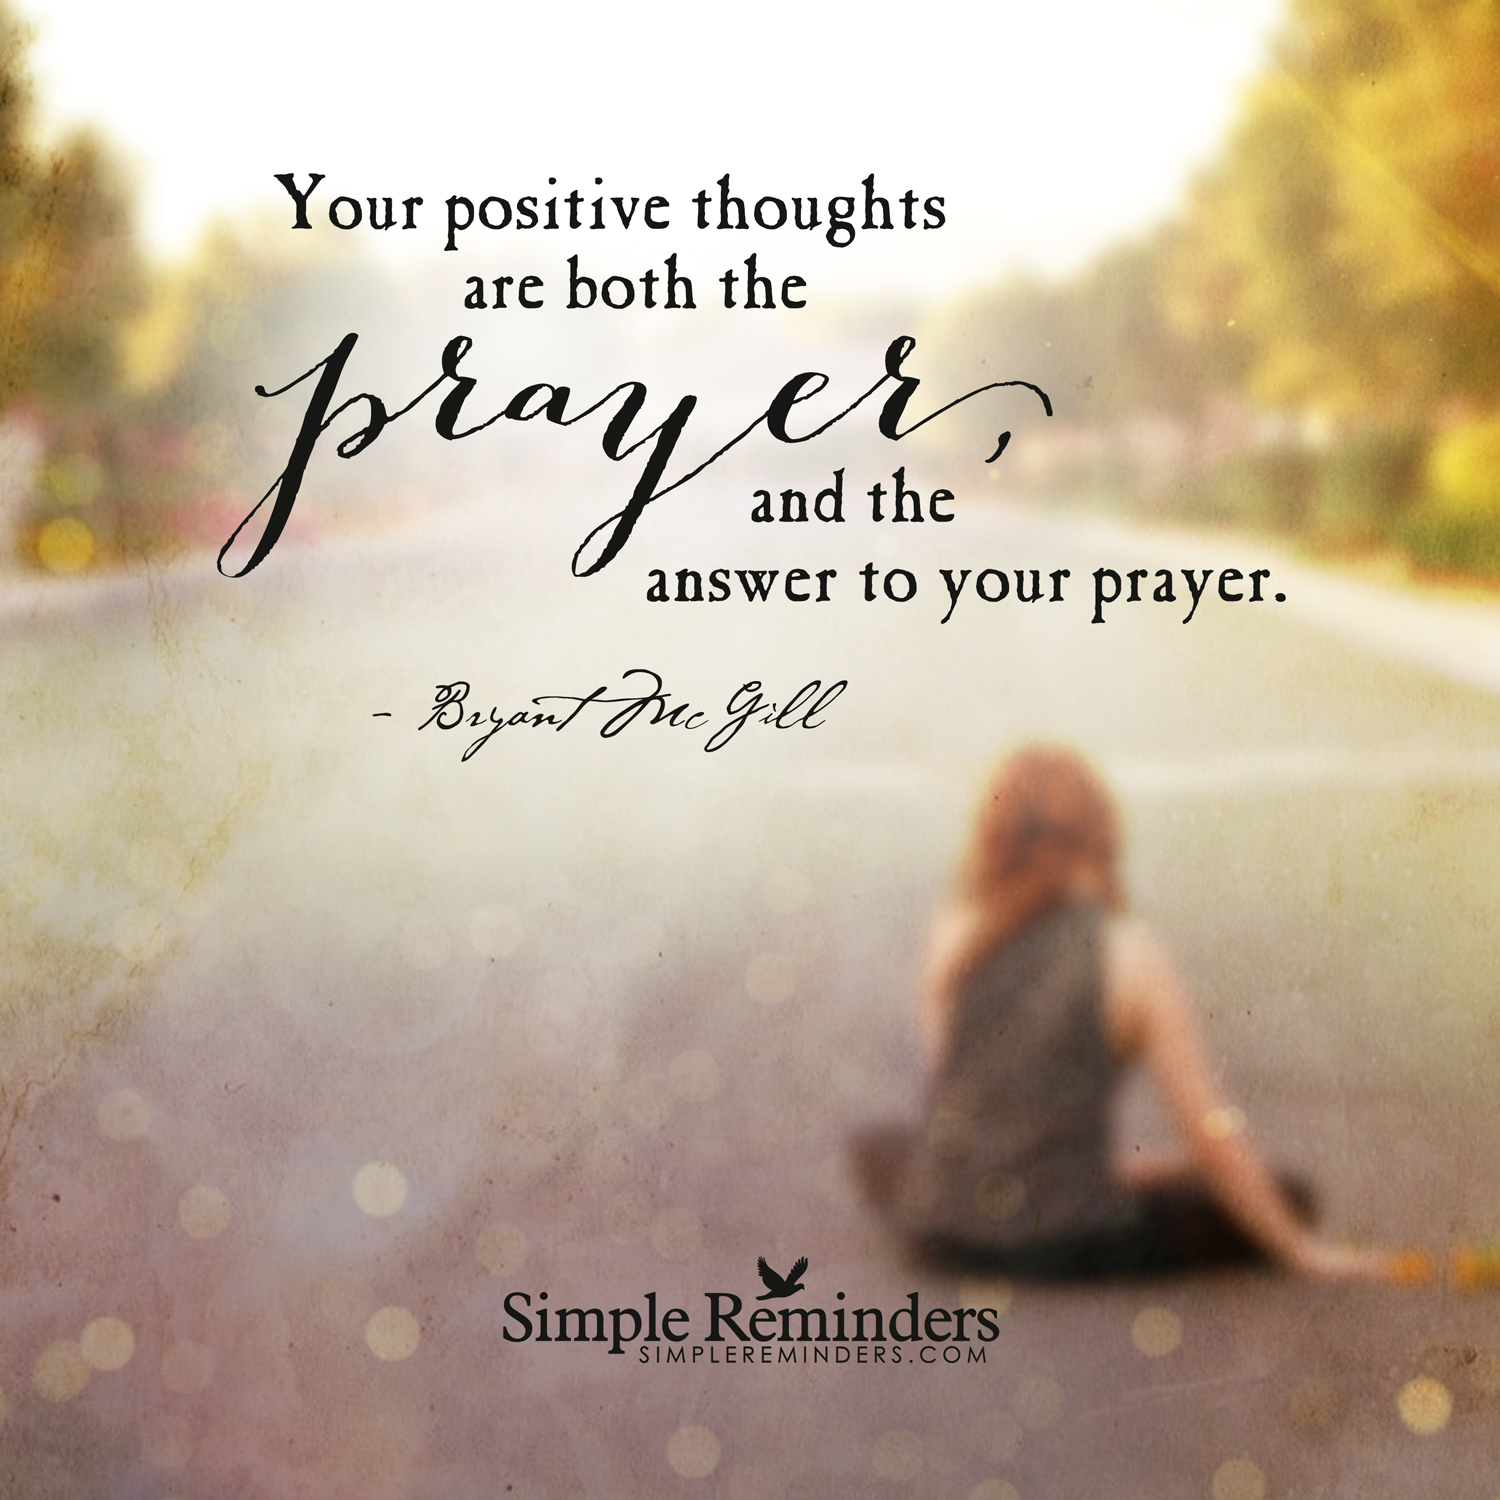 bryant-mcgill-positive-thoughts-prayer-answer-2s5g